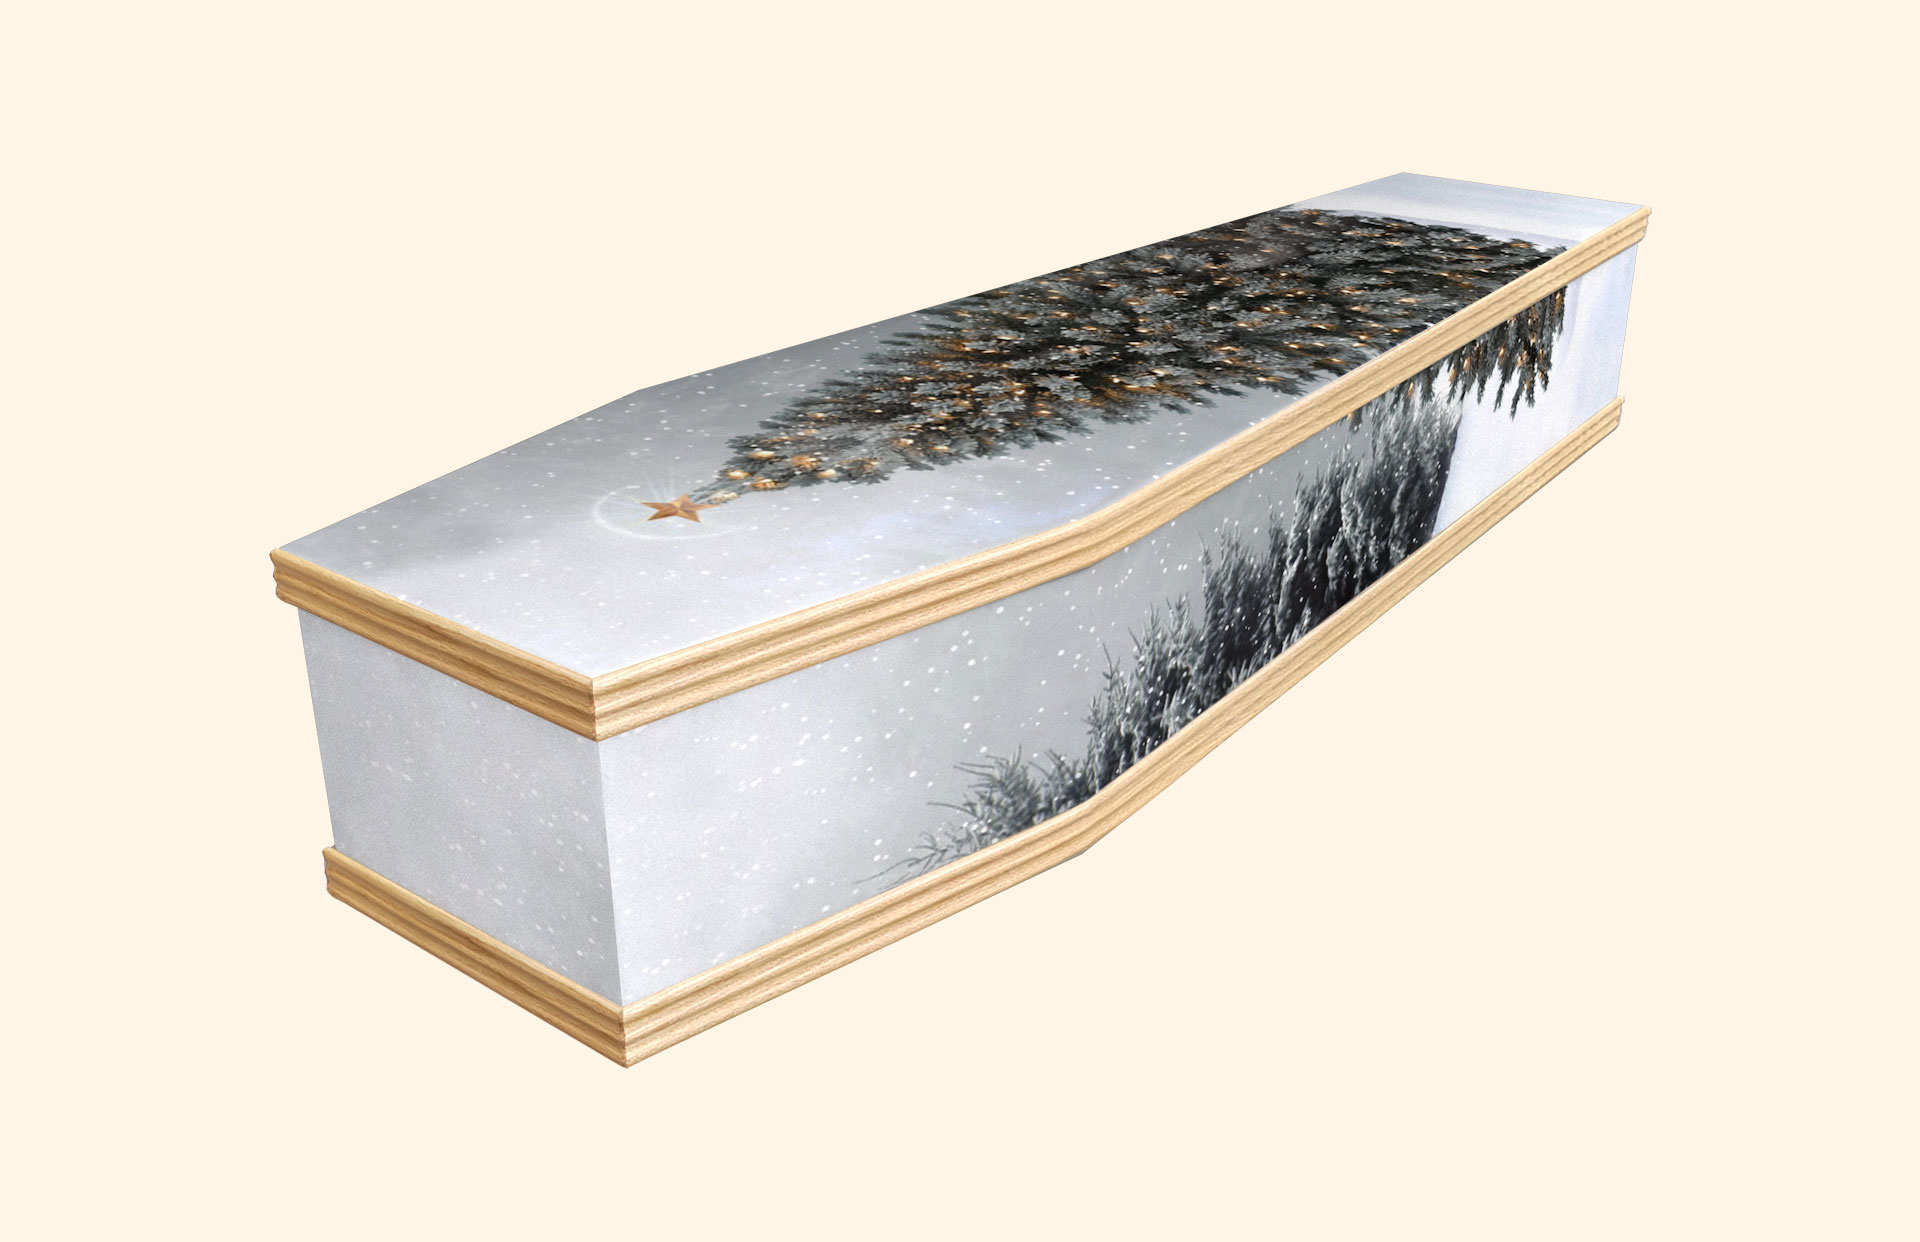 Christmas Tree design on a classic coffin